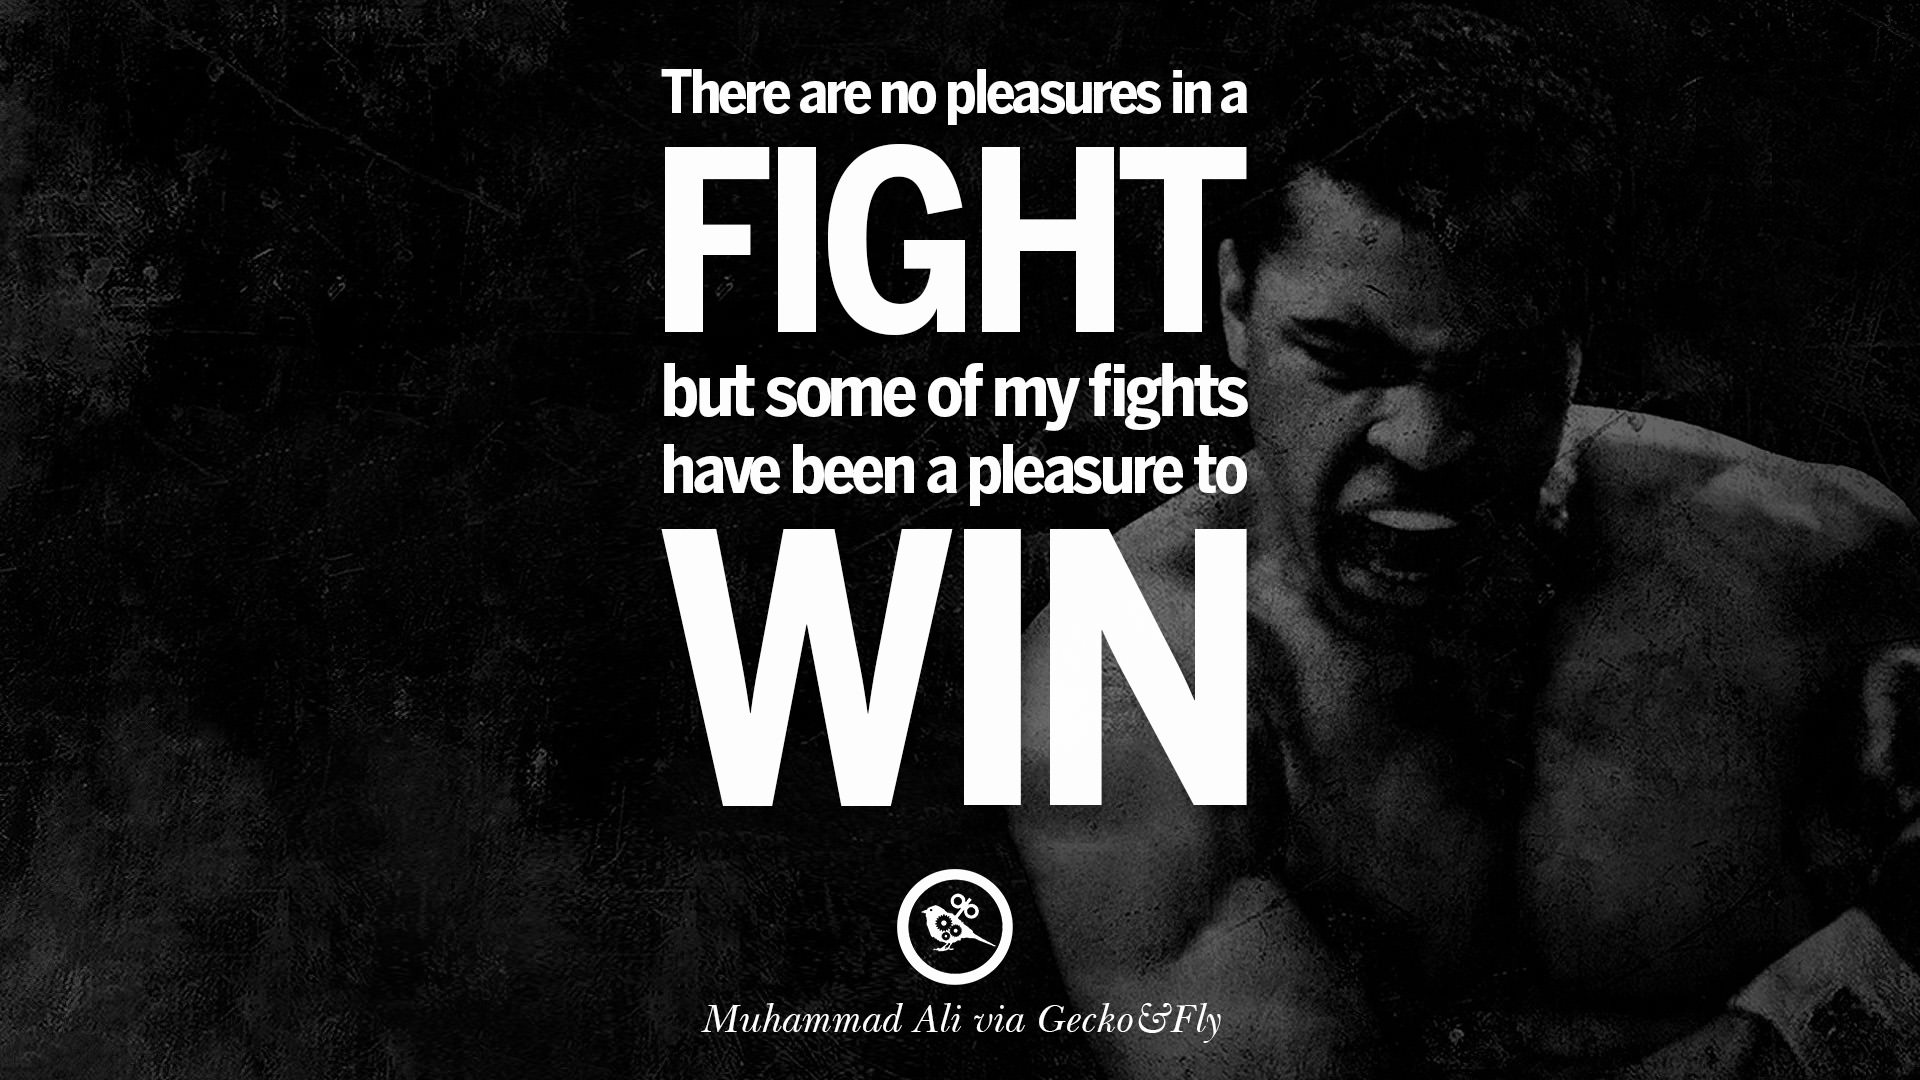 16 Winning Quotes by Muhammad Ali the Greatest